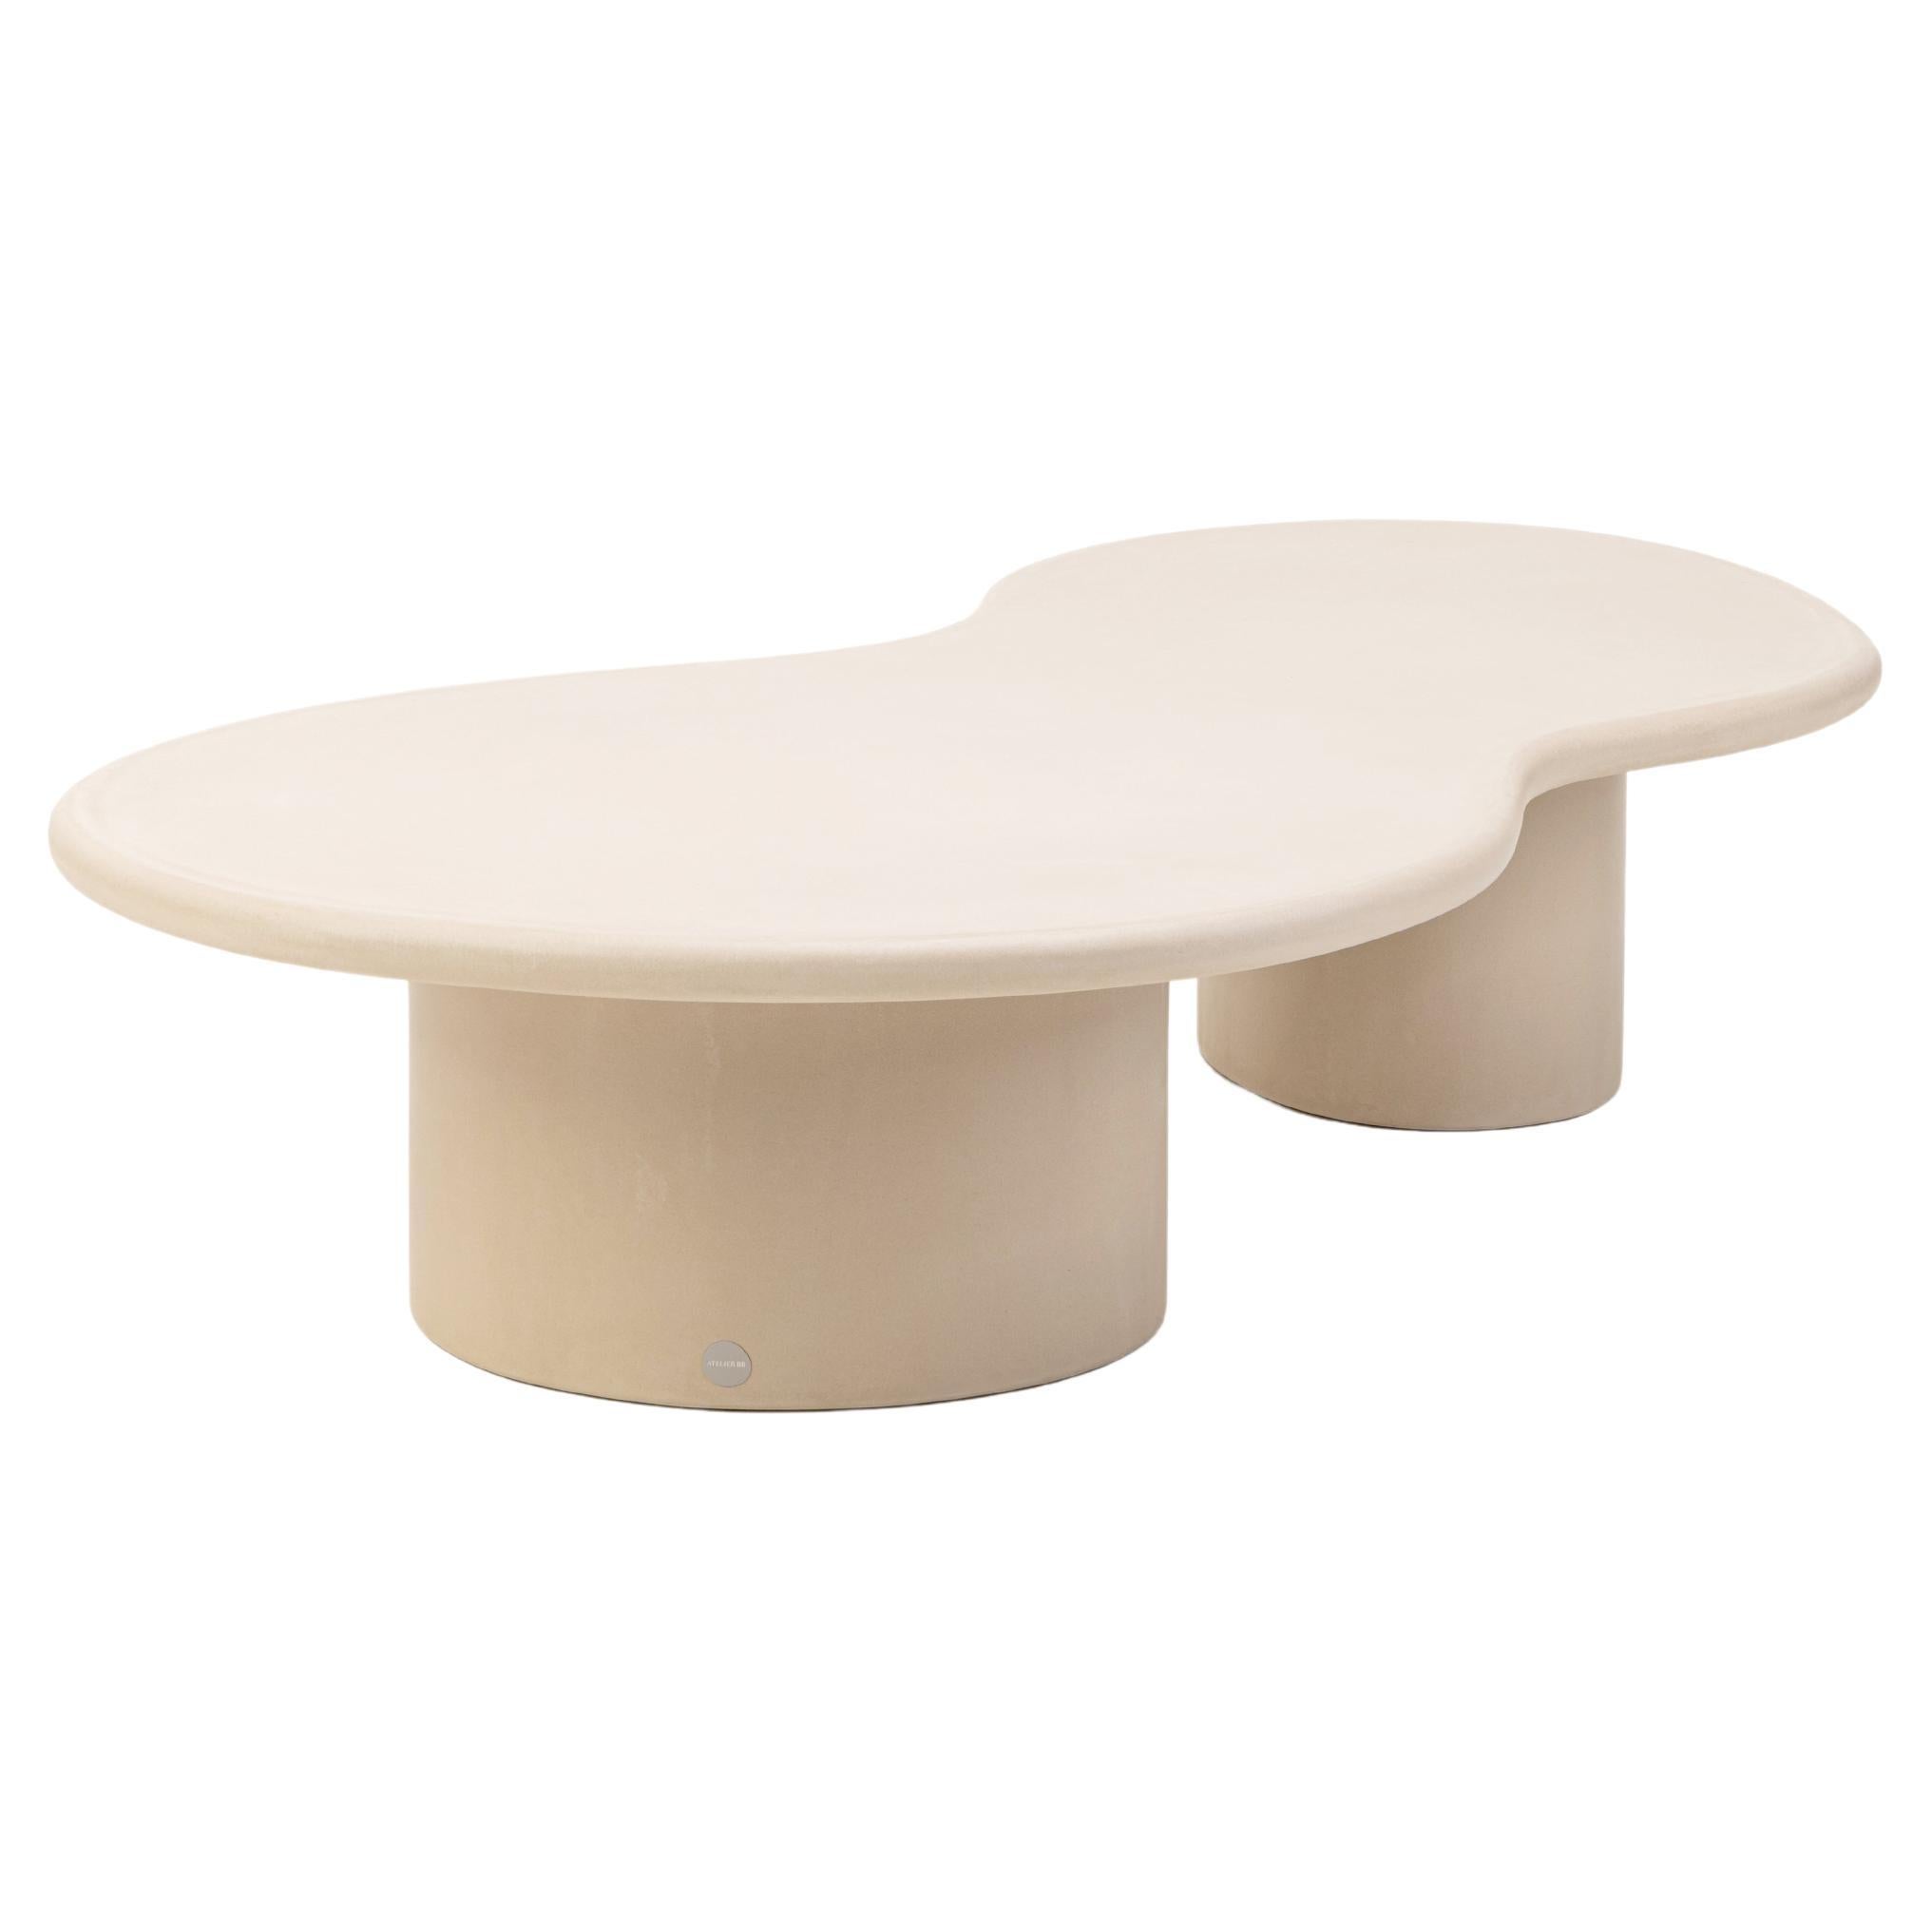 Organic Shaped Natural Plaster Coffee Table "Ovum" by Isabelle Beaumont For Sale